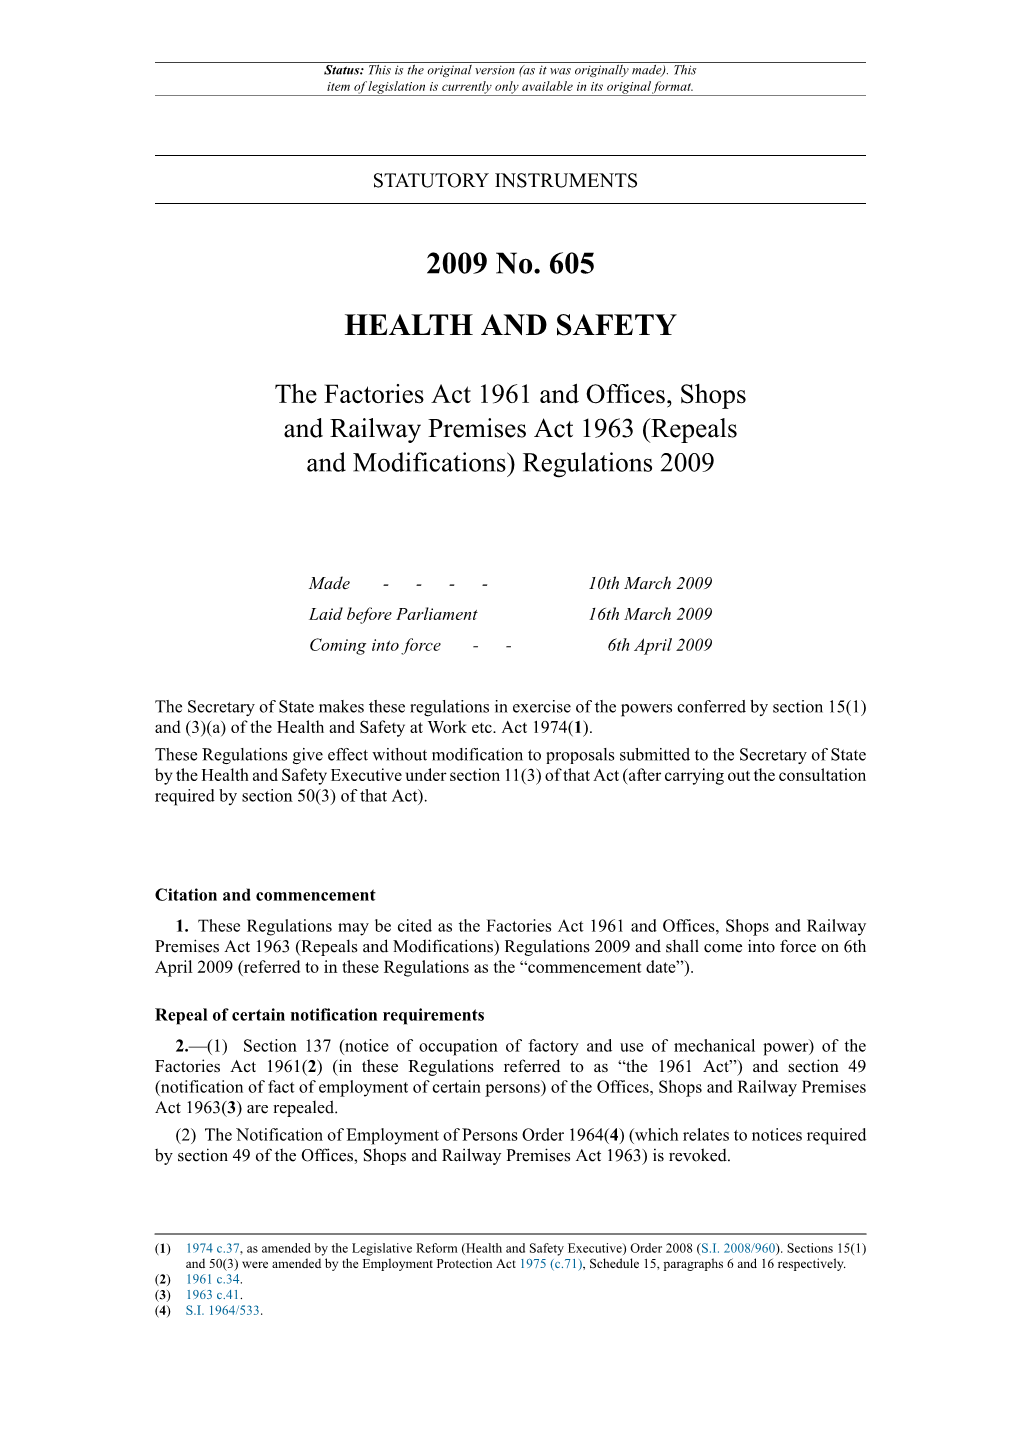 The Factories Act 1961 and Offices, Shops and Railway Premises Act 1963 (Repeals and Modifications) Regulations 2009